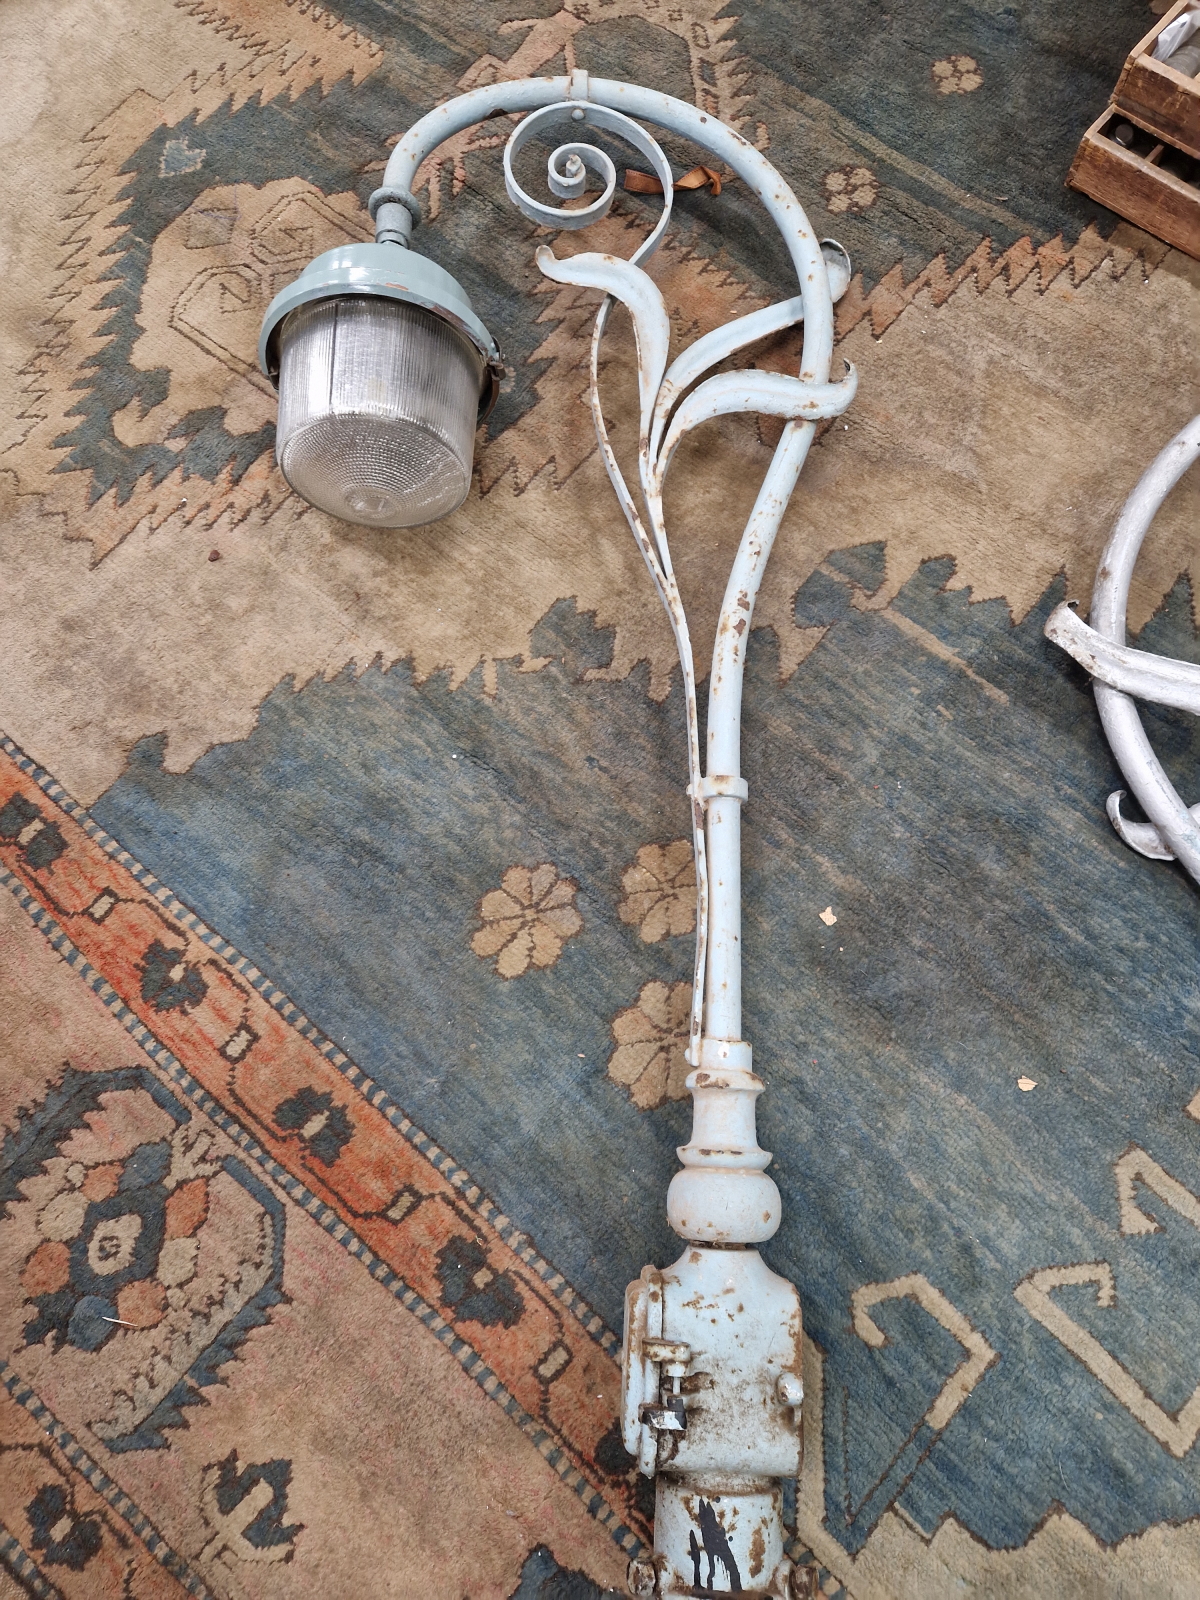 TWO SIMILAR VINTAGE  STREET LIGHT HEADS, EACH LAMP HELD ON A CURVED ARM WITH THREE LEAVES FORMING - Image 2 of 3